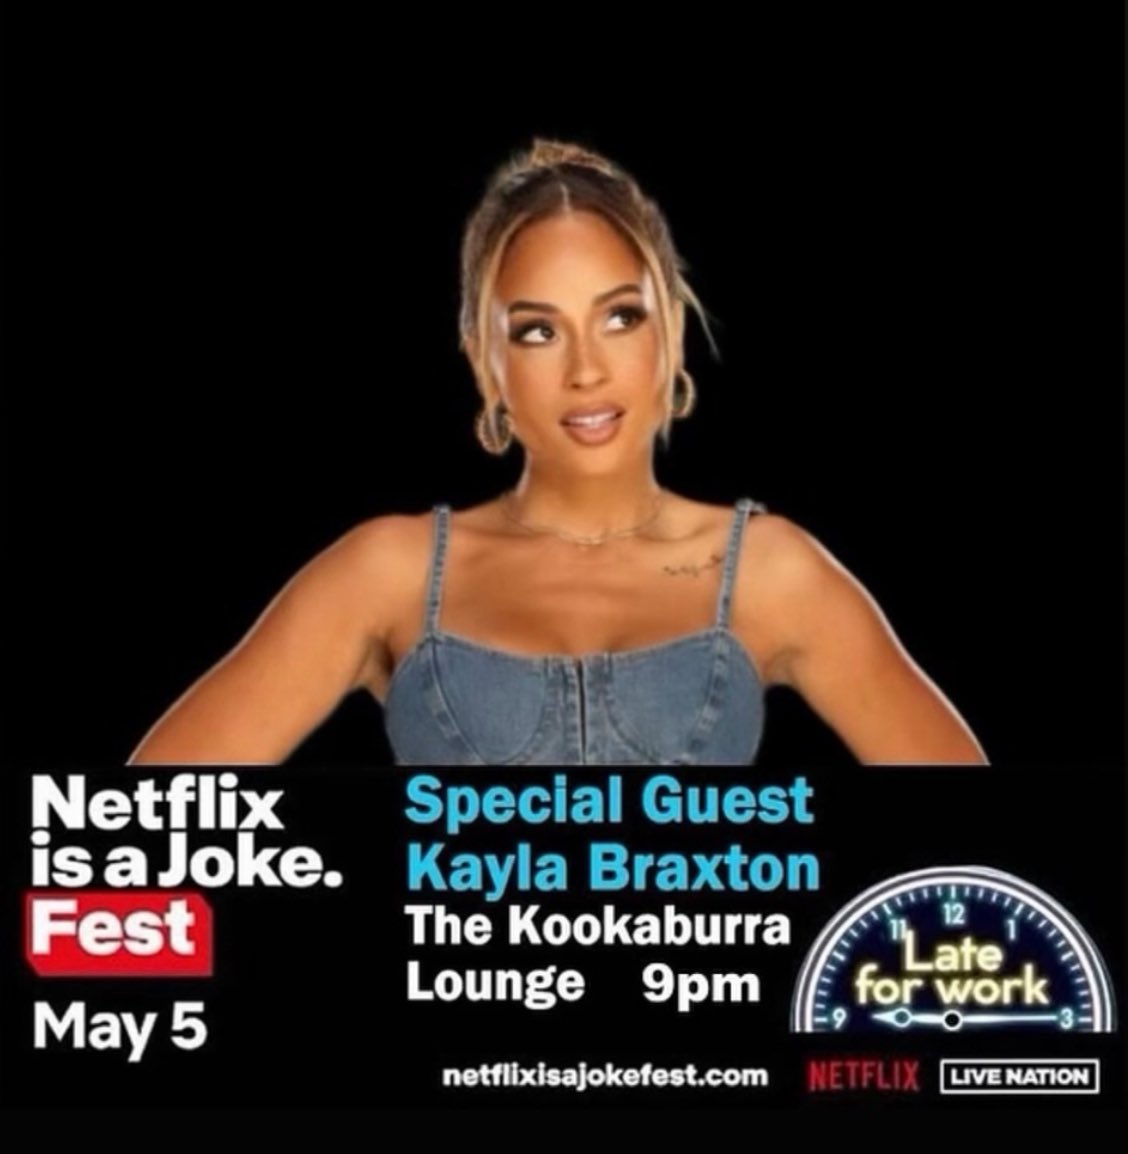 I’ve been quietly dabbling in comedy for the last couple years. But never thought I’d get a stage like this! Come see me probably bomb, but laugh anyway because you love me and think I’m cute 🥰 @NetflixIsAJoke #netflixisajoke 

netflixisajokefest.com/shows/late-for…